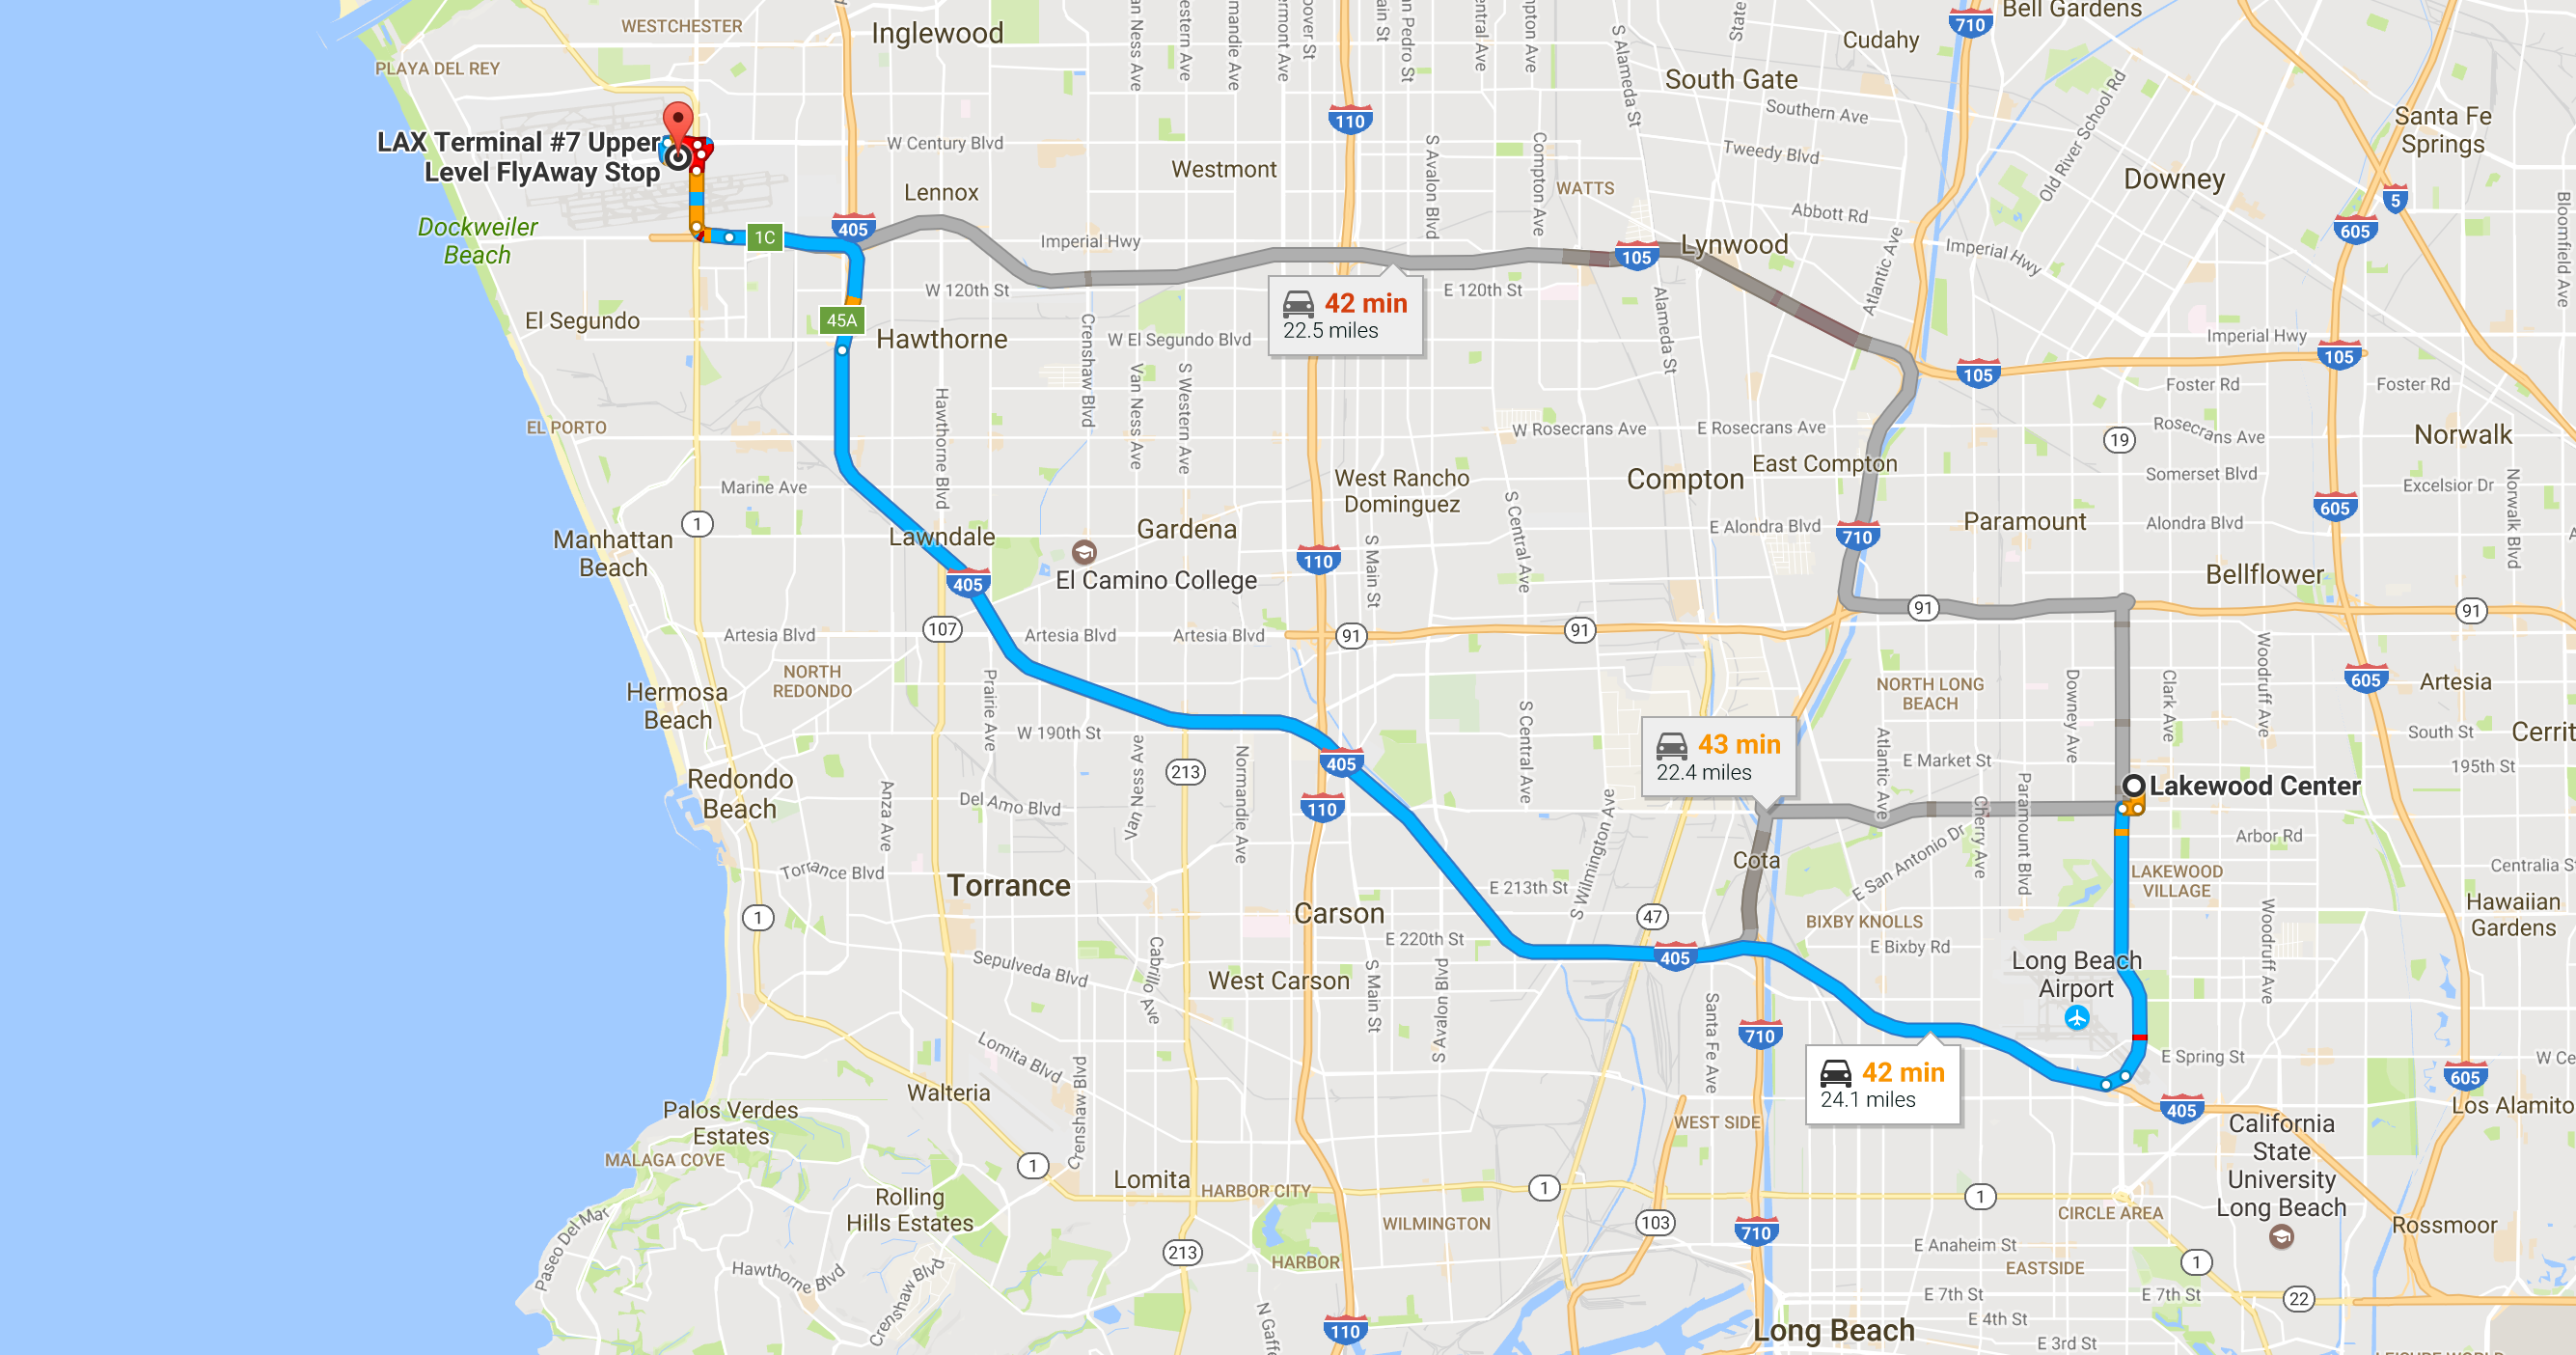 Google Maps, From Lakewood Center Lakewood LA to LAX Terminal 7 departures